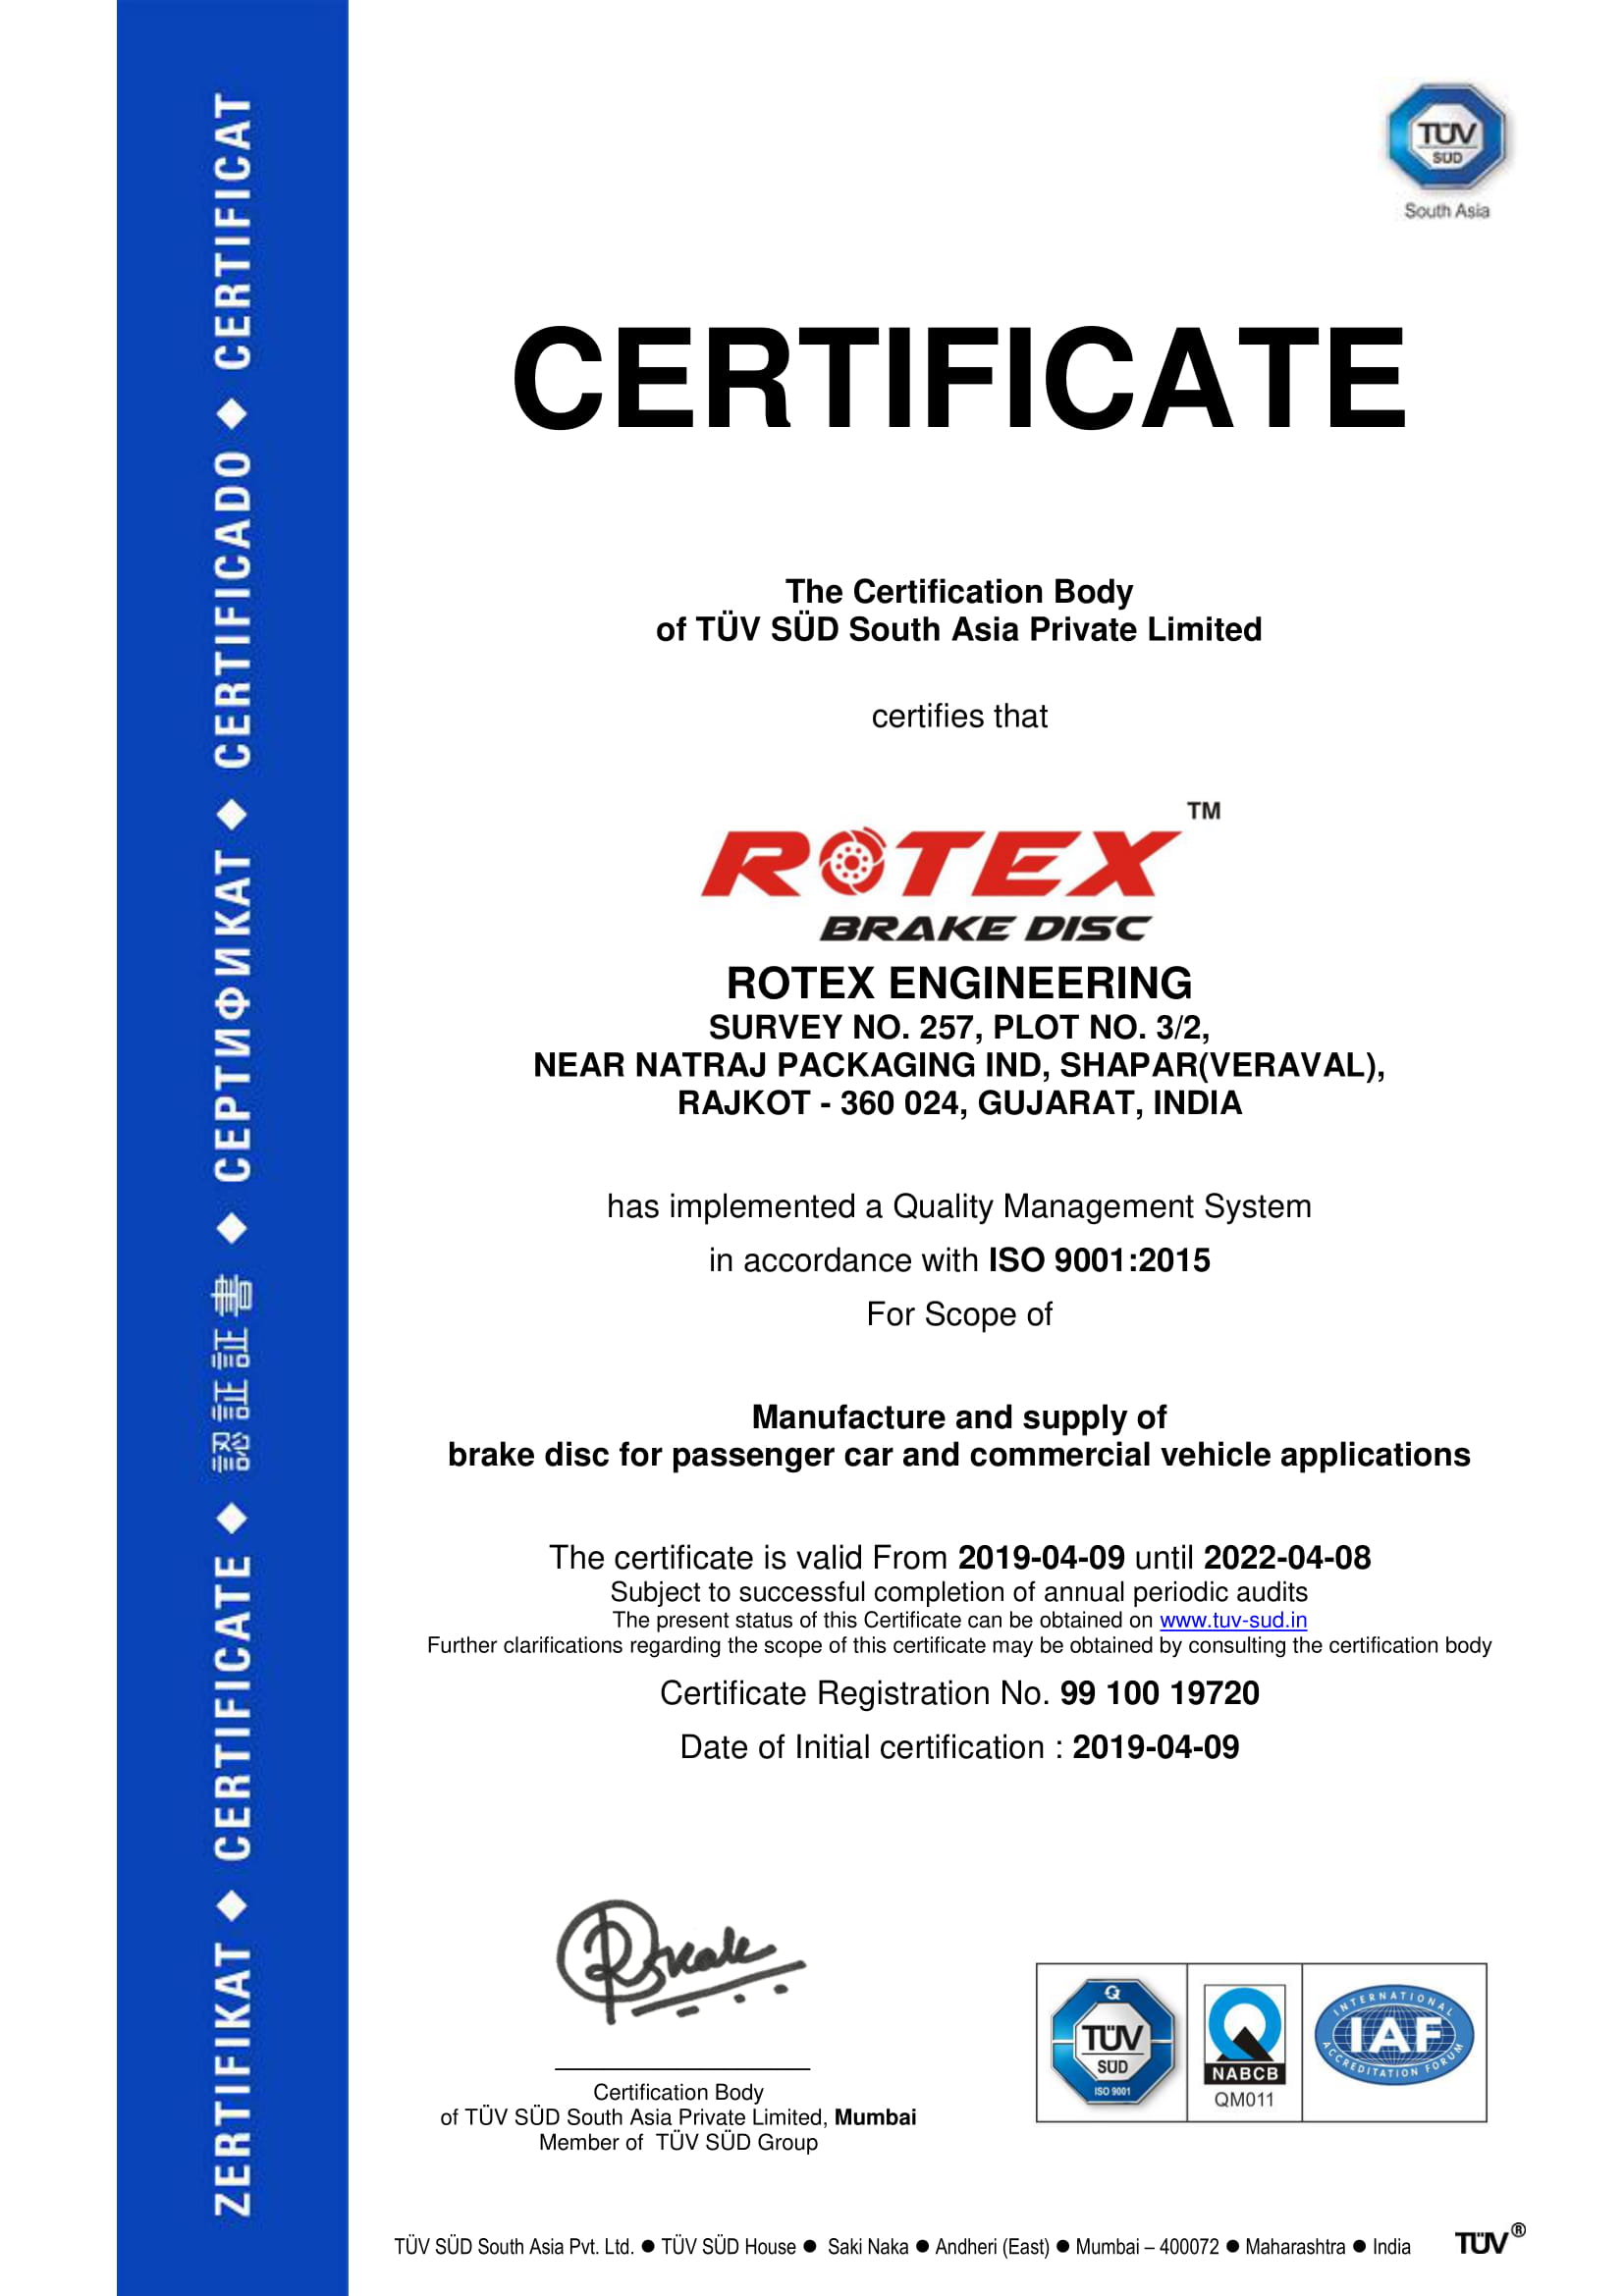 about rotex 